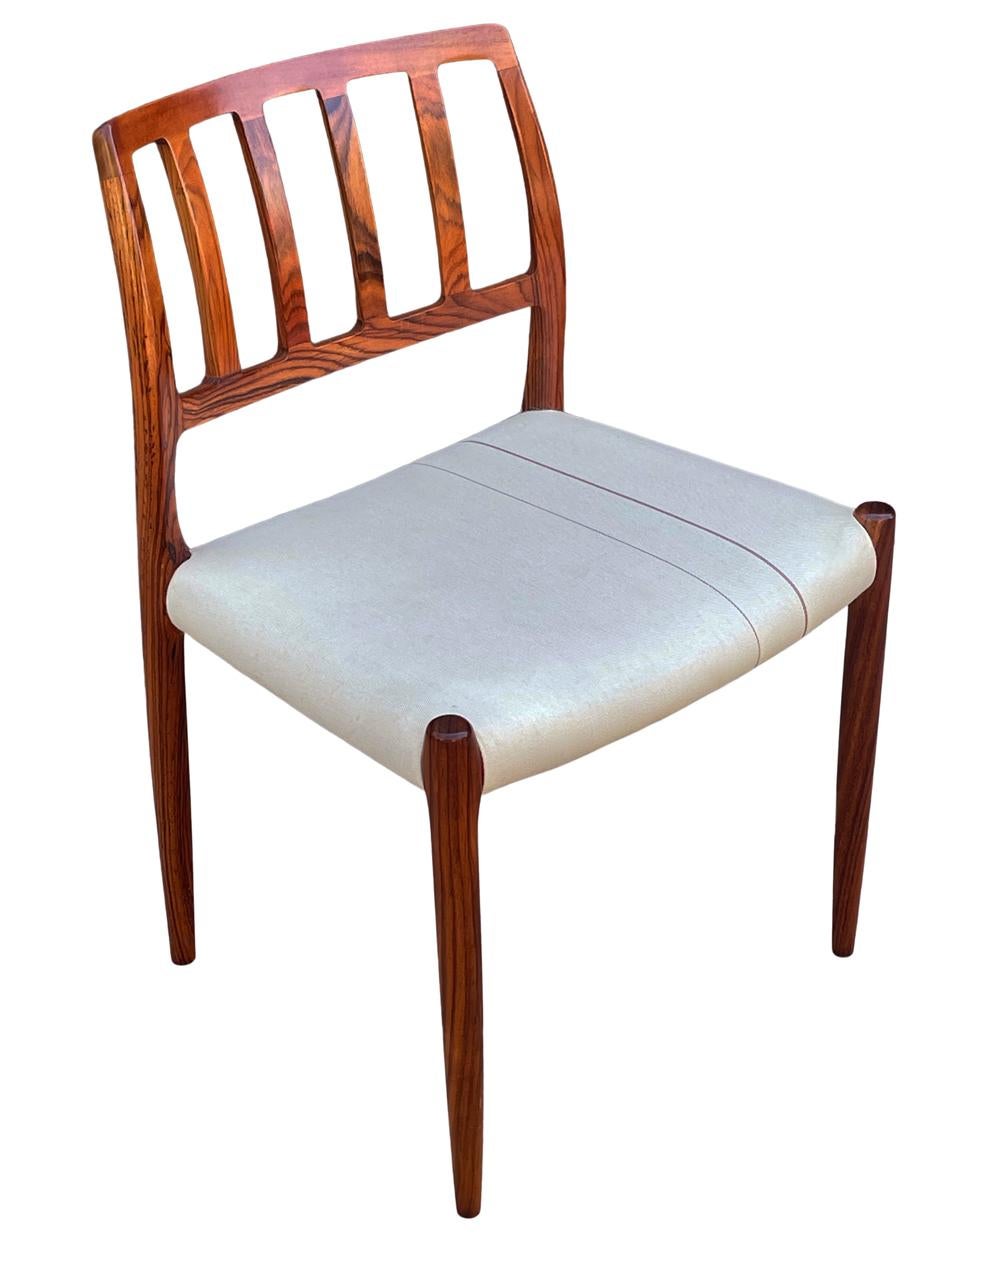 A complete set of 8 dining chairs designed by Neils O. Möller and produced in Denmark circa 1960's. These feature solid rosewood construction with original fabric seat cushions. The sculpted backs are the absolute highlight of these chairs. Fabric